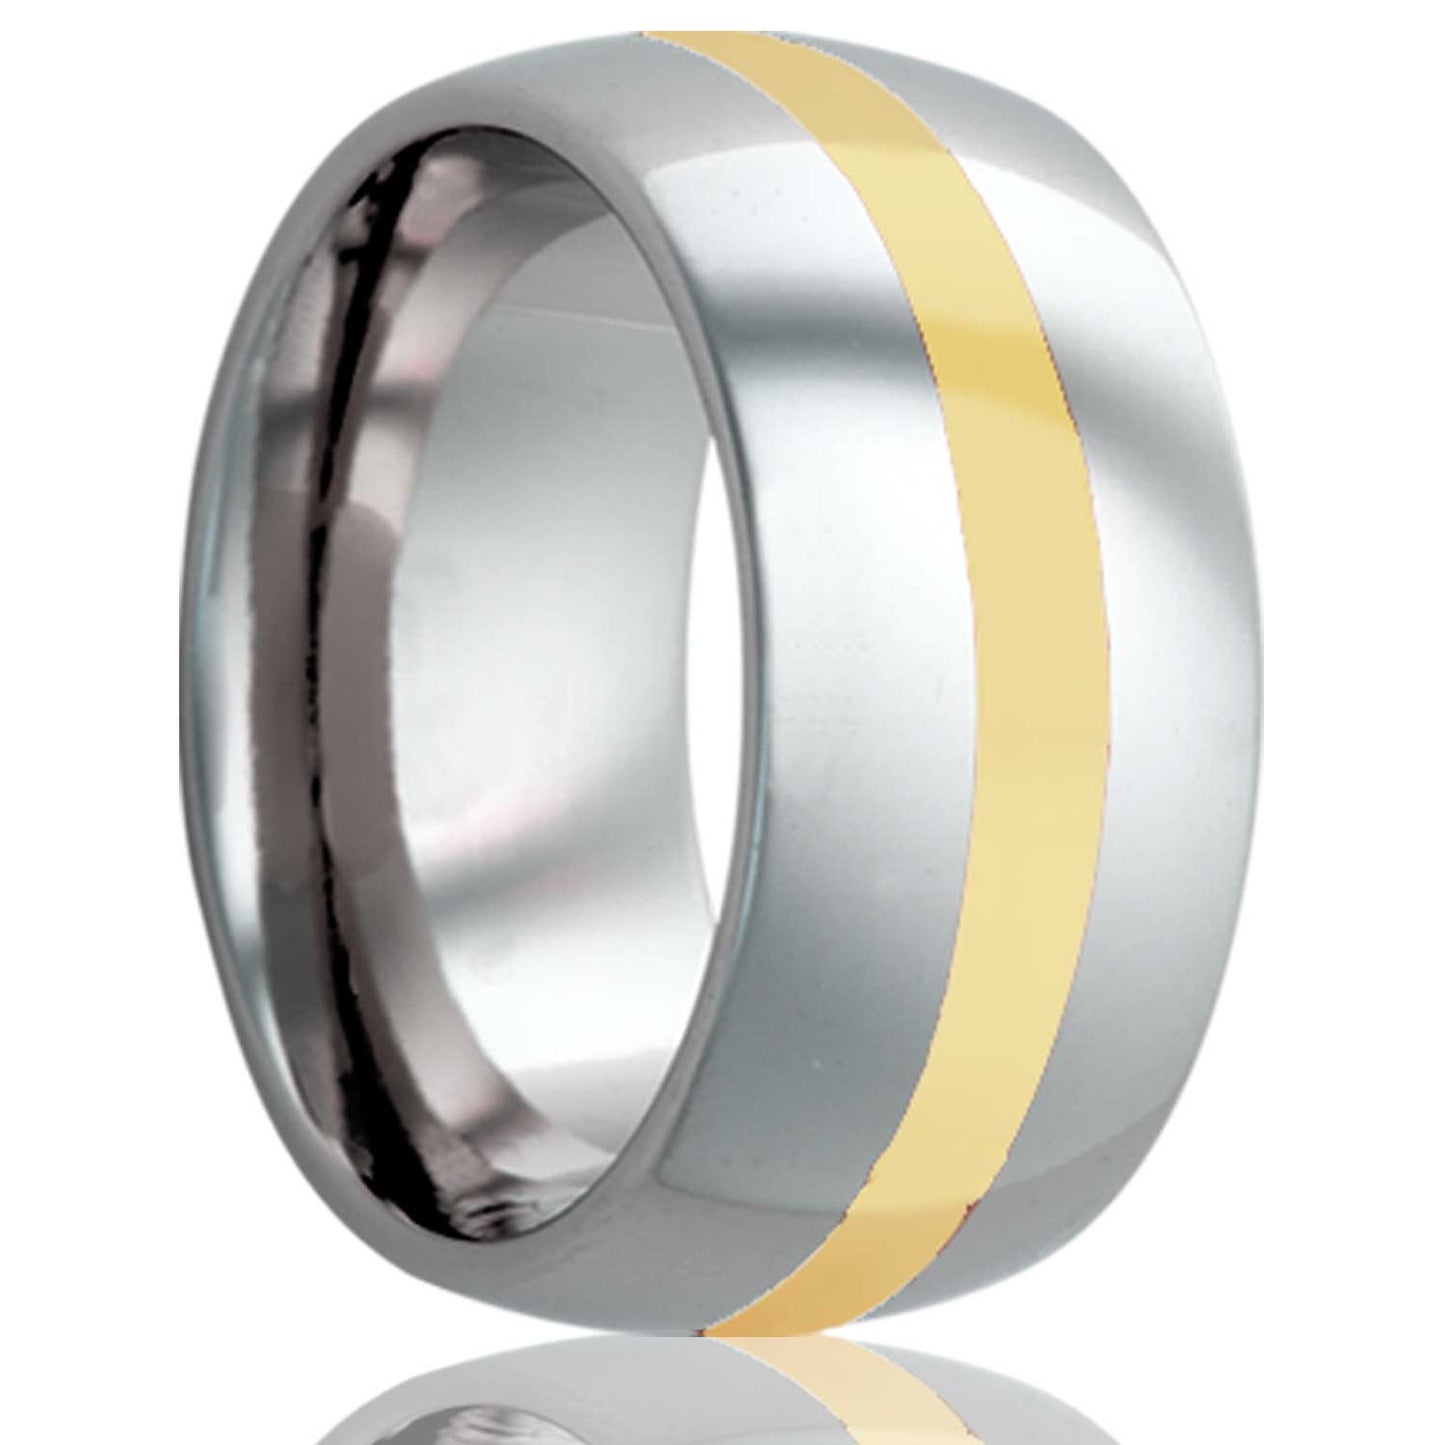 A 14k yellow gold inlay domed cobalt wedding band displayed on a neutral white background.